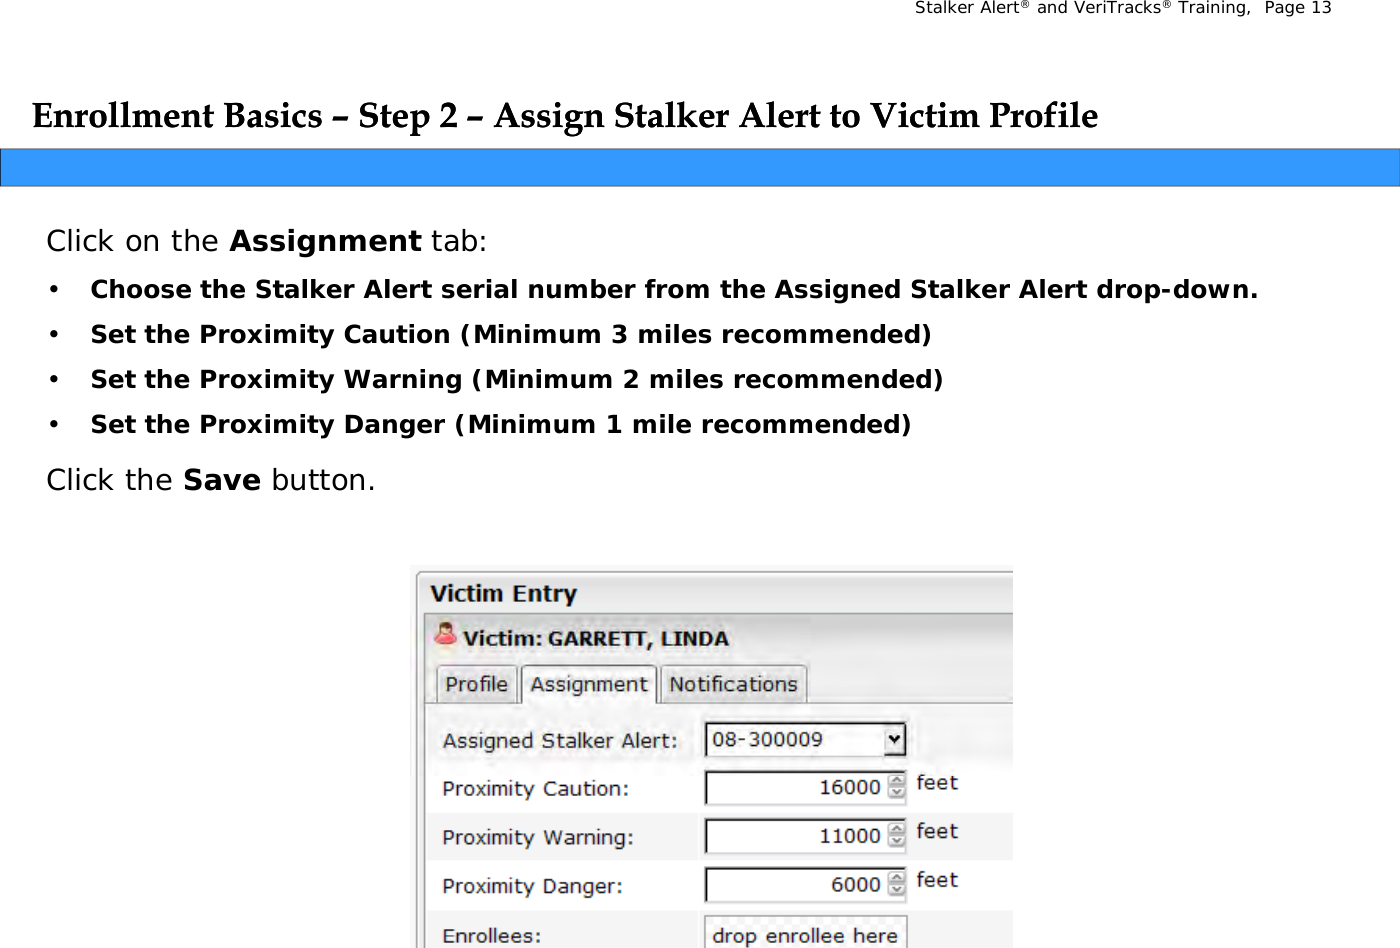 Stalker Alert®and VeriTracks®Training,  Page 13Enrollment Basics Enrollment Basics ––Step 2 Step 2 –– Assign Stalker Alert to Victim ProfileAssign Stalker Alert to Victim ProfileppggClick on the Assignment tab: •Choose the Stalker Alert serial number from the Assigned Stalker Alert drop-down.•Choose the Stalker Alert serial number from the Assigned Stalker Alert dropdown.•Set the Proximity Caution (Minimum 3 miles recommended)•Set the Proximity Warning (Minimum 2 miles recommended) •Set the Proximity Danger (Minimum 1 mile recommended)Click the Save button.